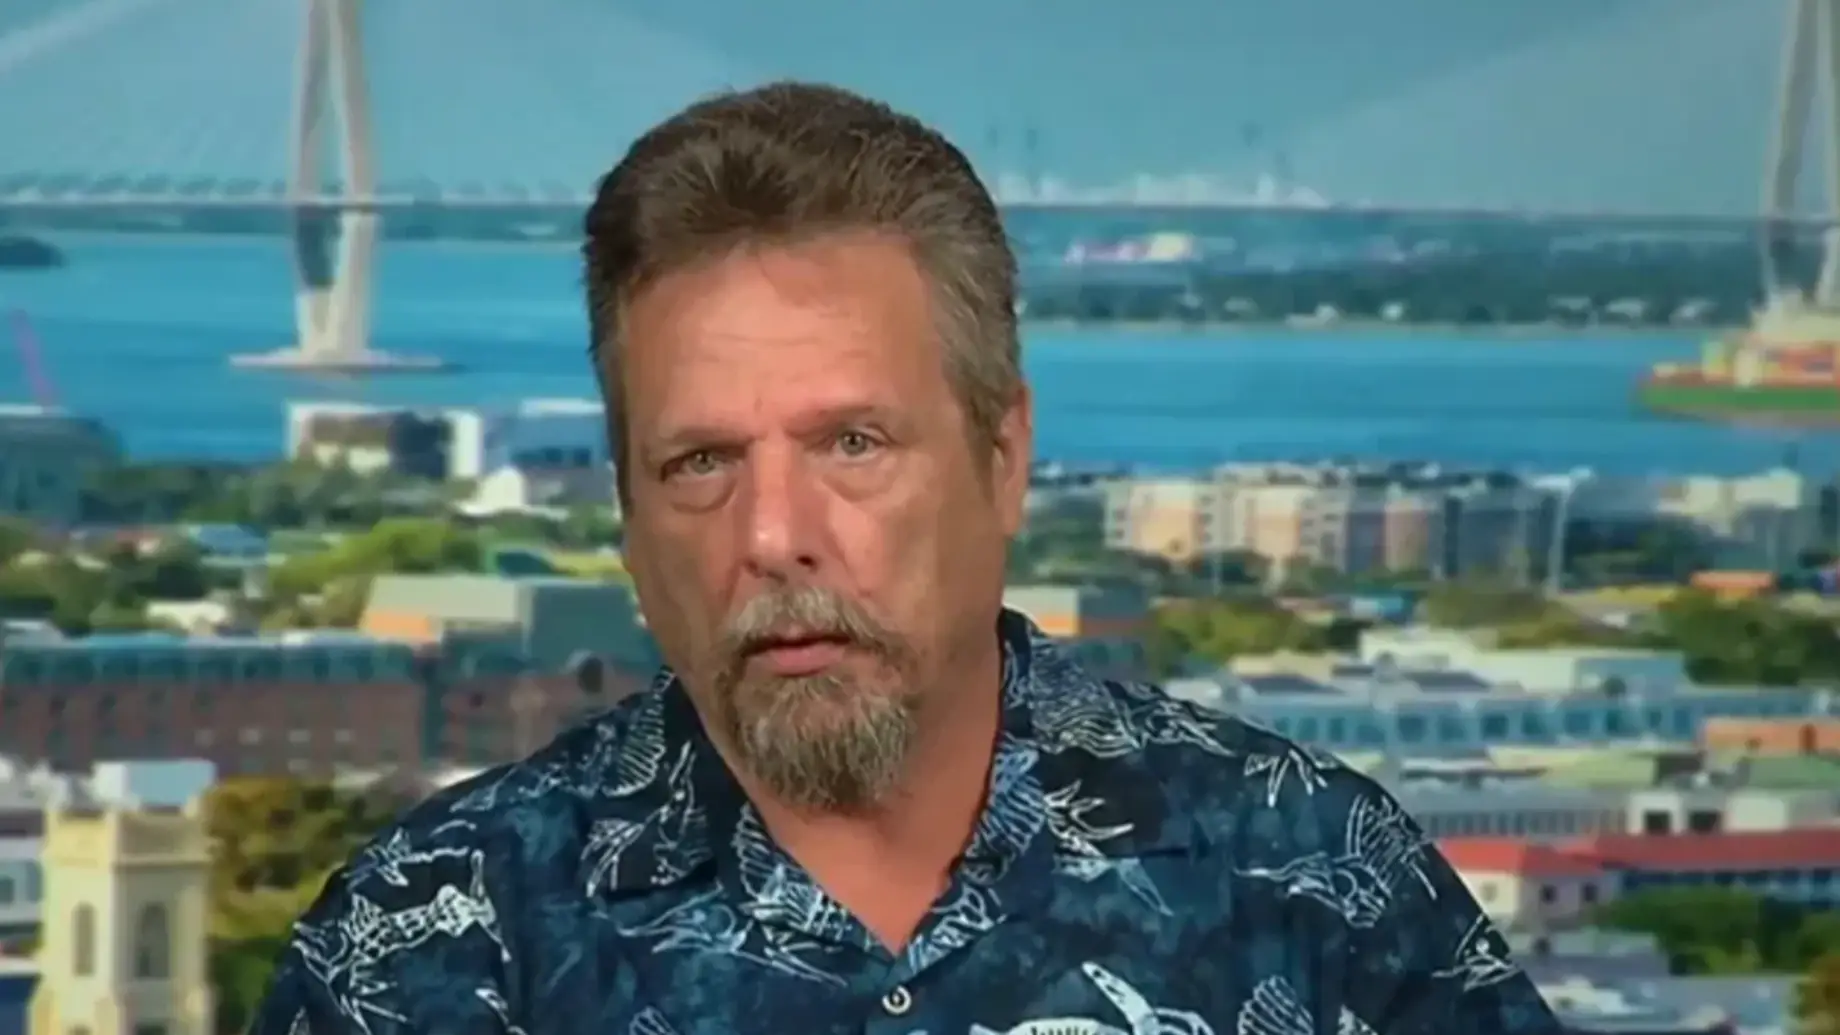 Boeing Whistleblower Predicted His Own Death: ‘If Anything Happens to Me, It’s Not Suicide’